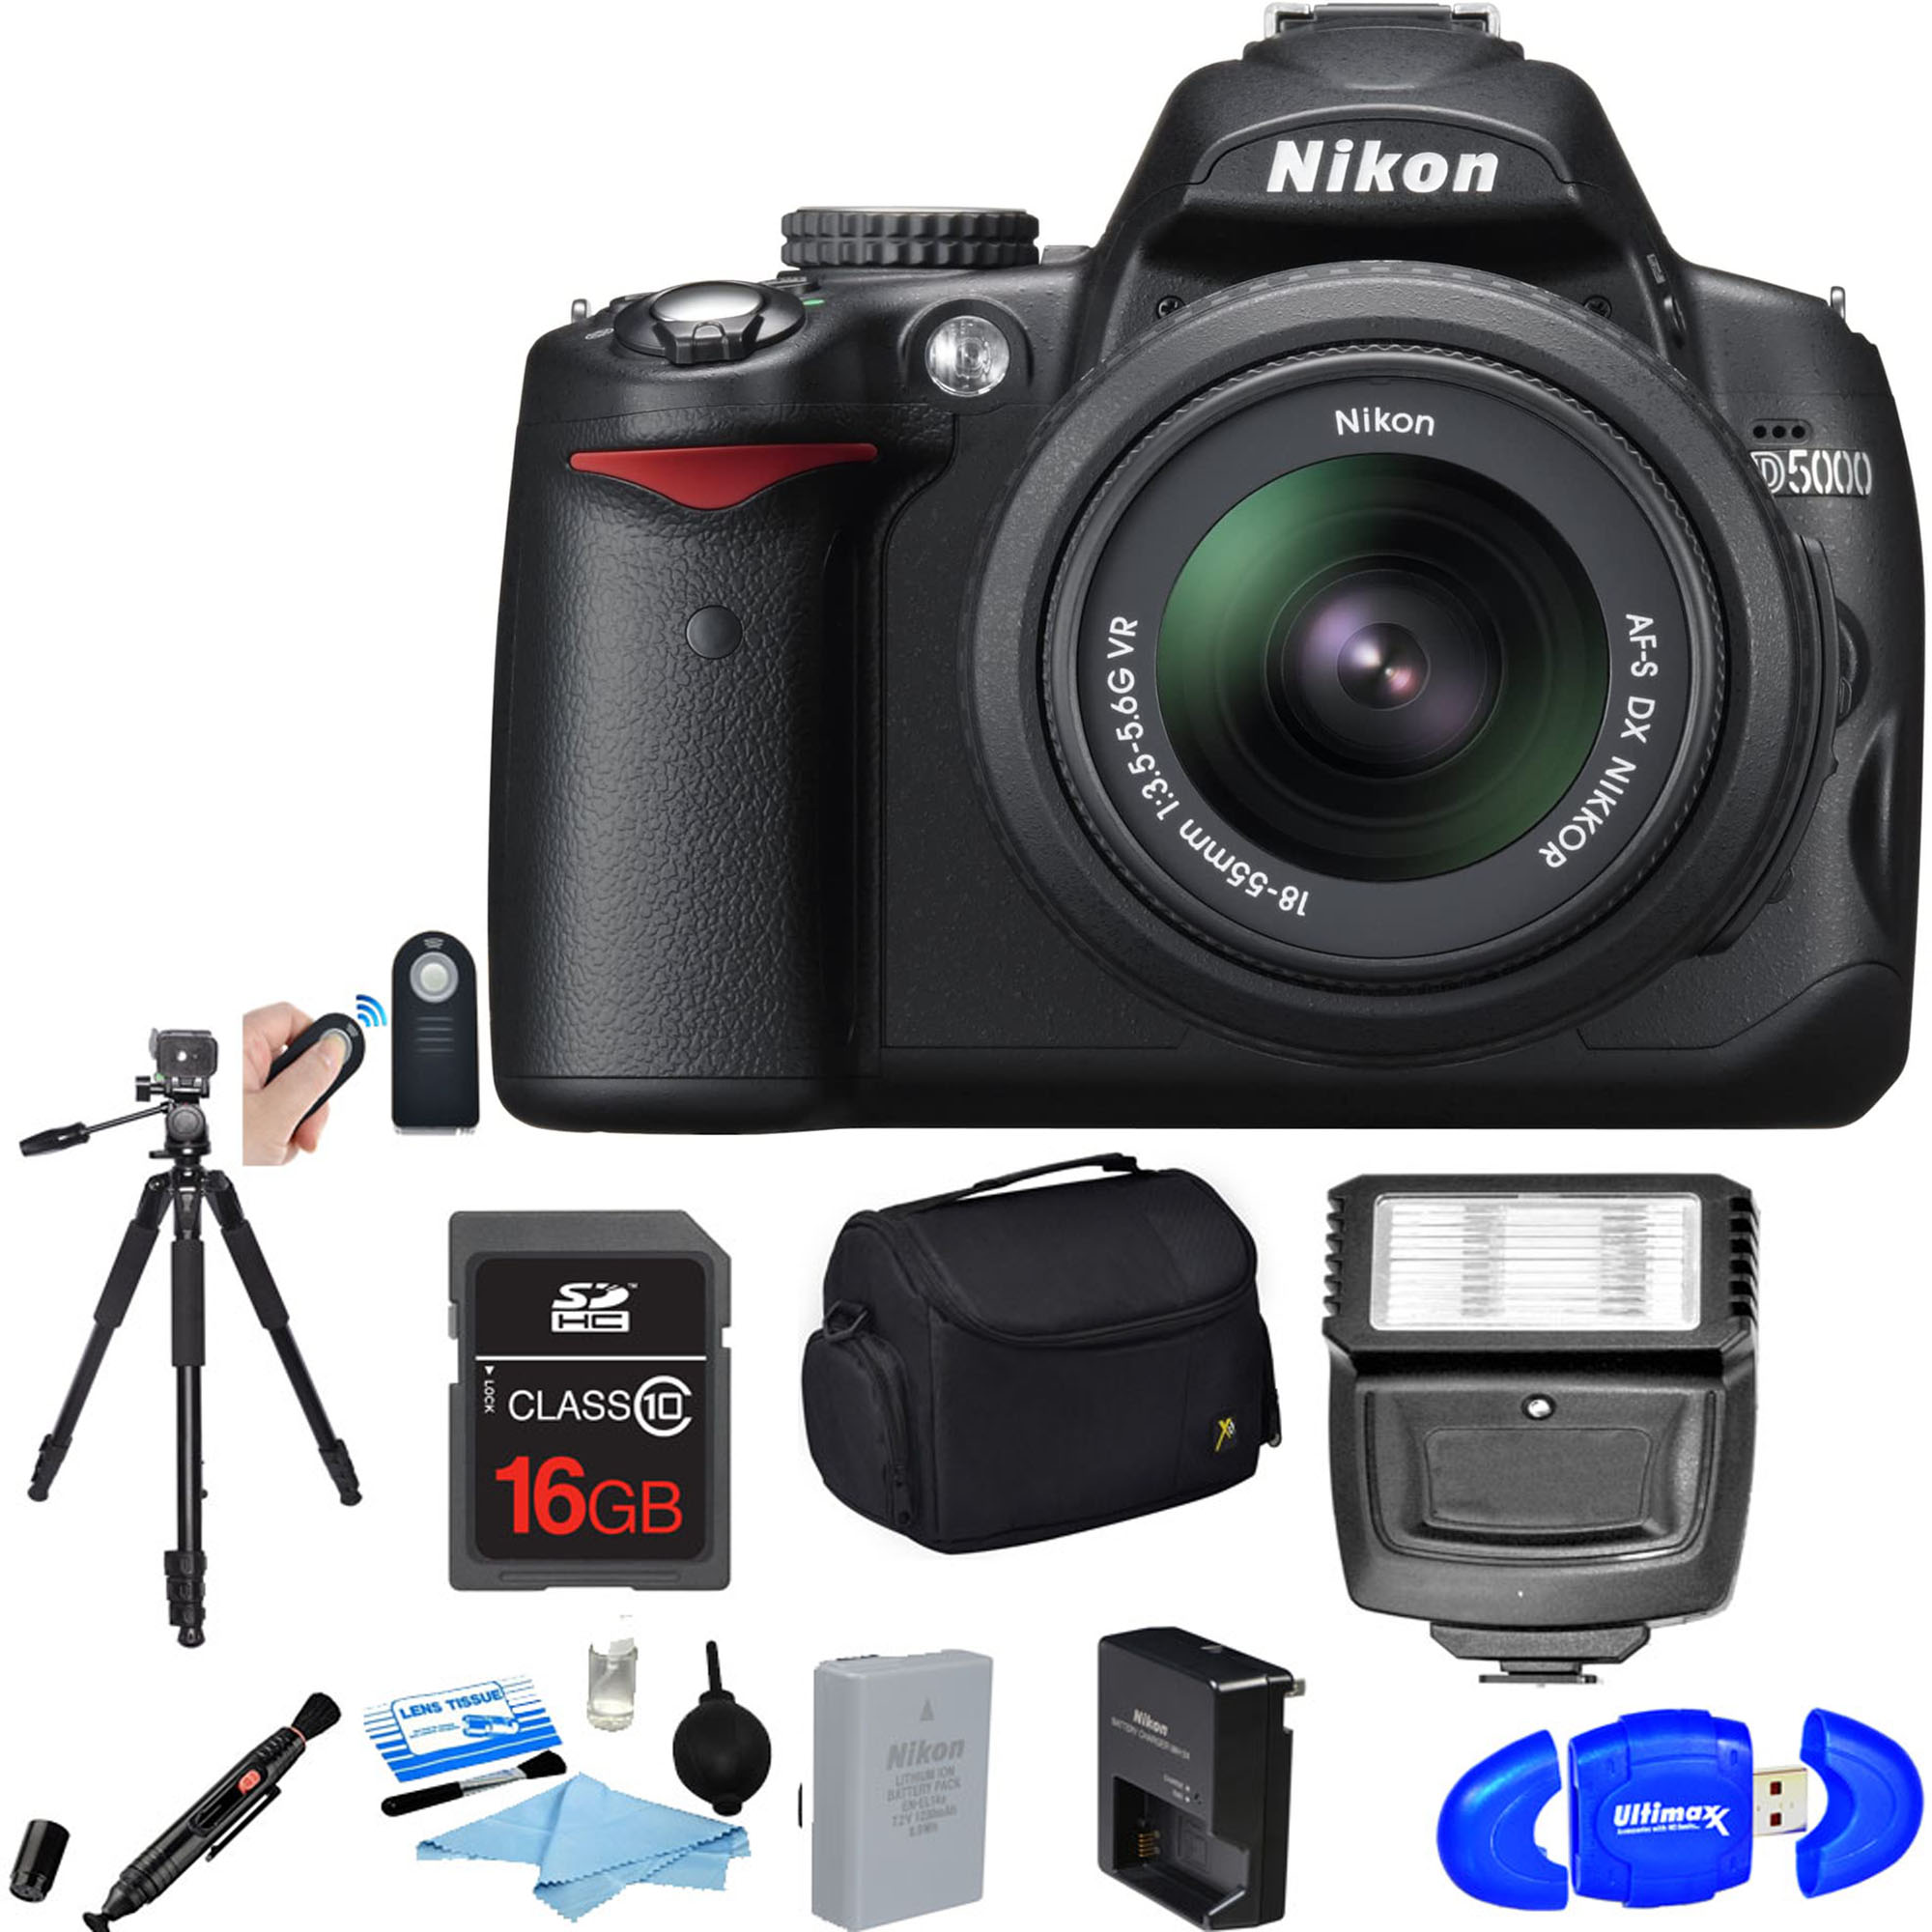 Nikon D5000/D5600 Digital SLR Camera Kit with 18-55mm VR Lens with Additional Accessories - image 1 of 1